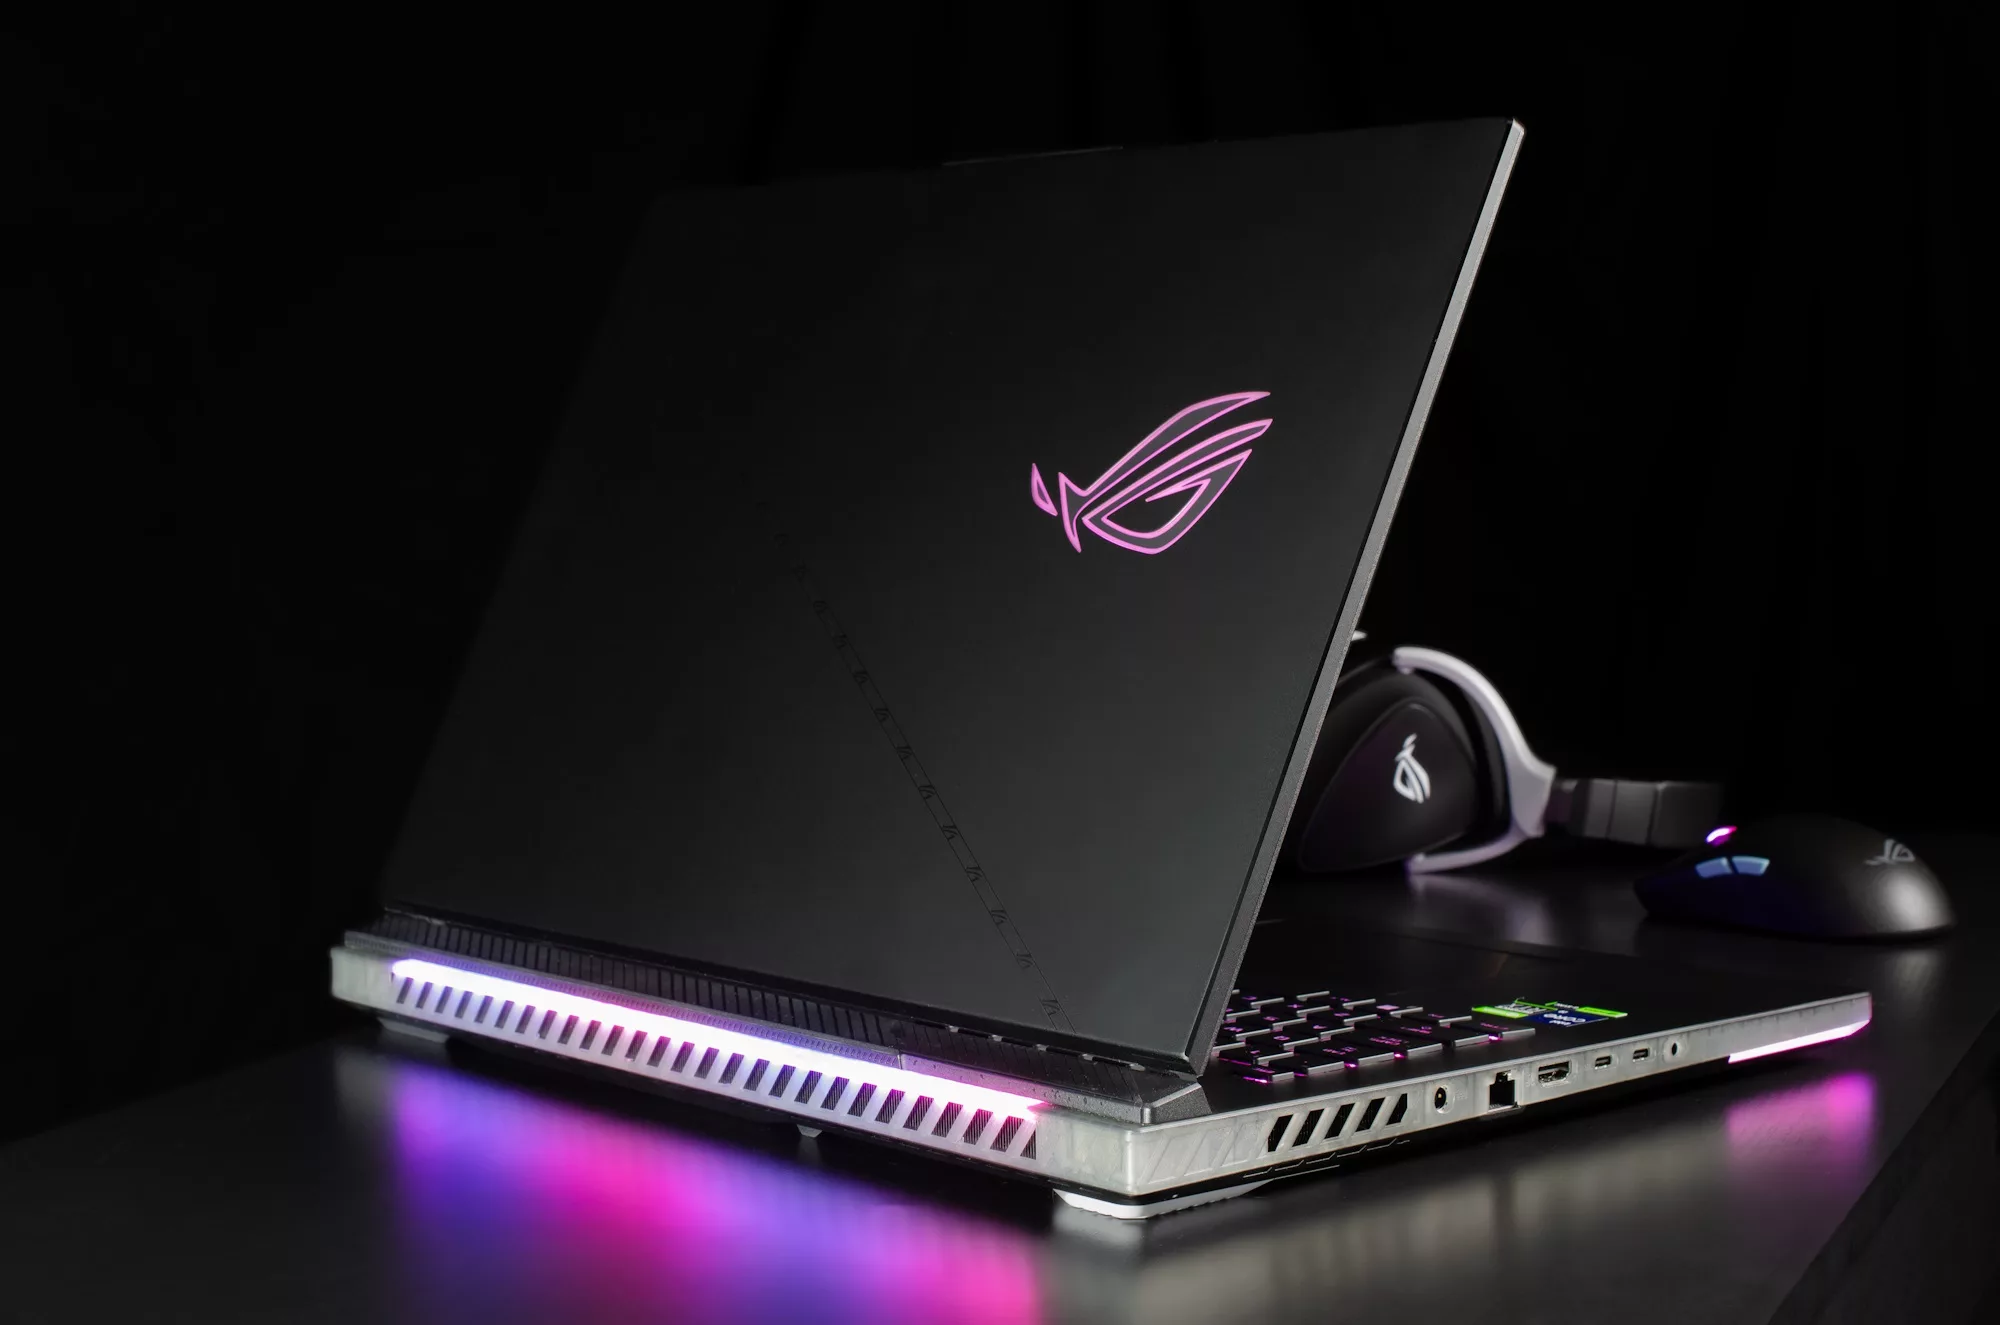 A back view of the ROG Strix SCAR 18 laptop, with an ROG gaming mouse and headset in the background